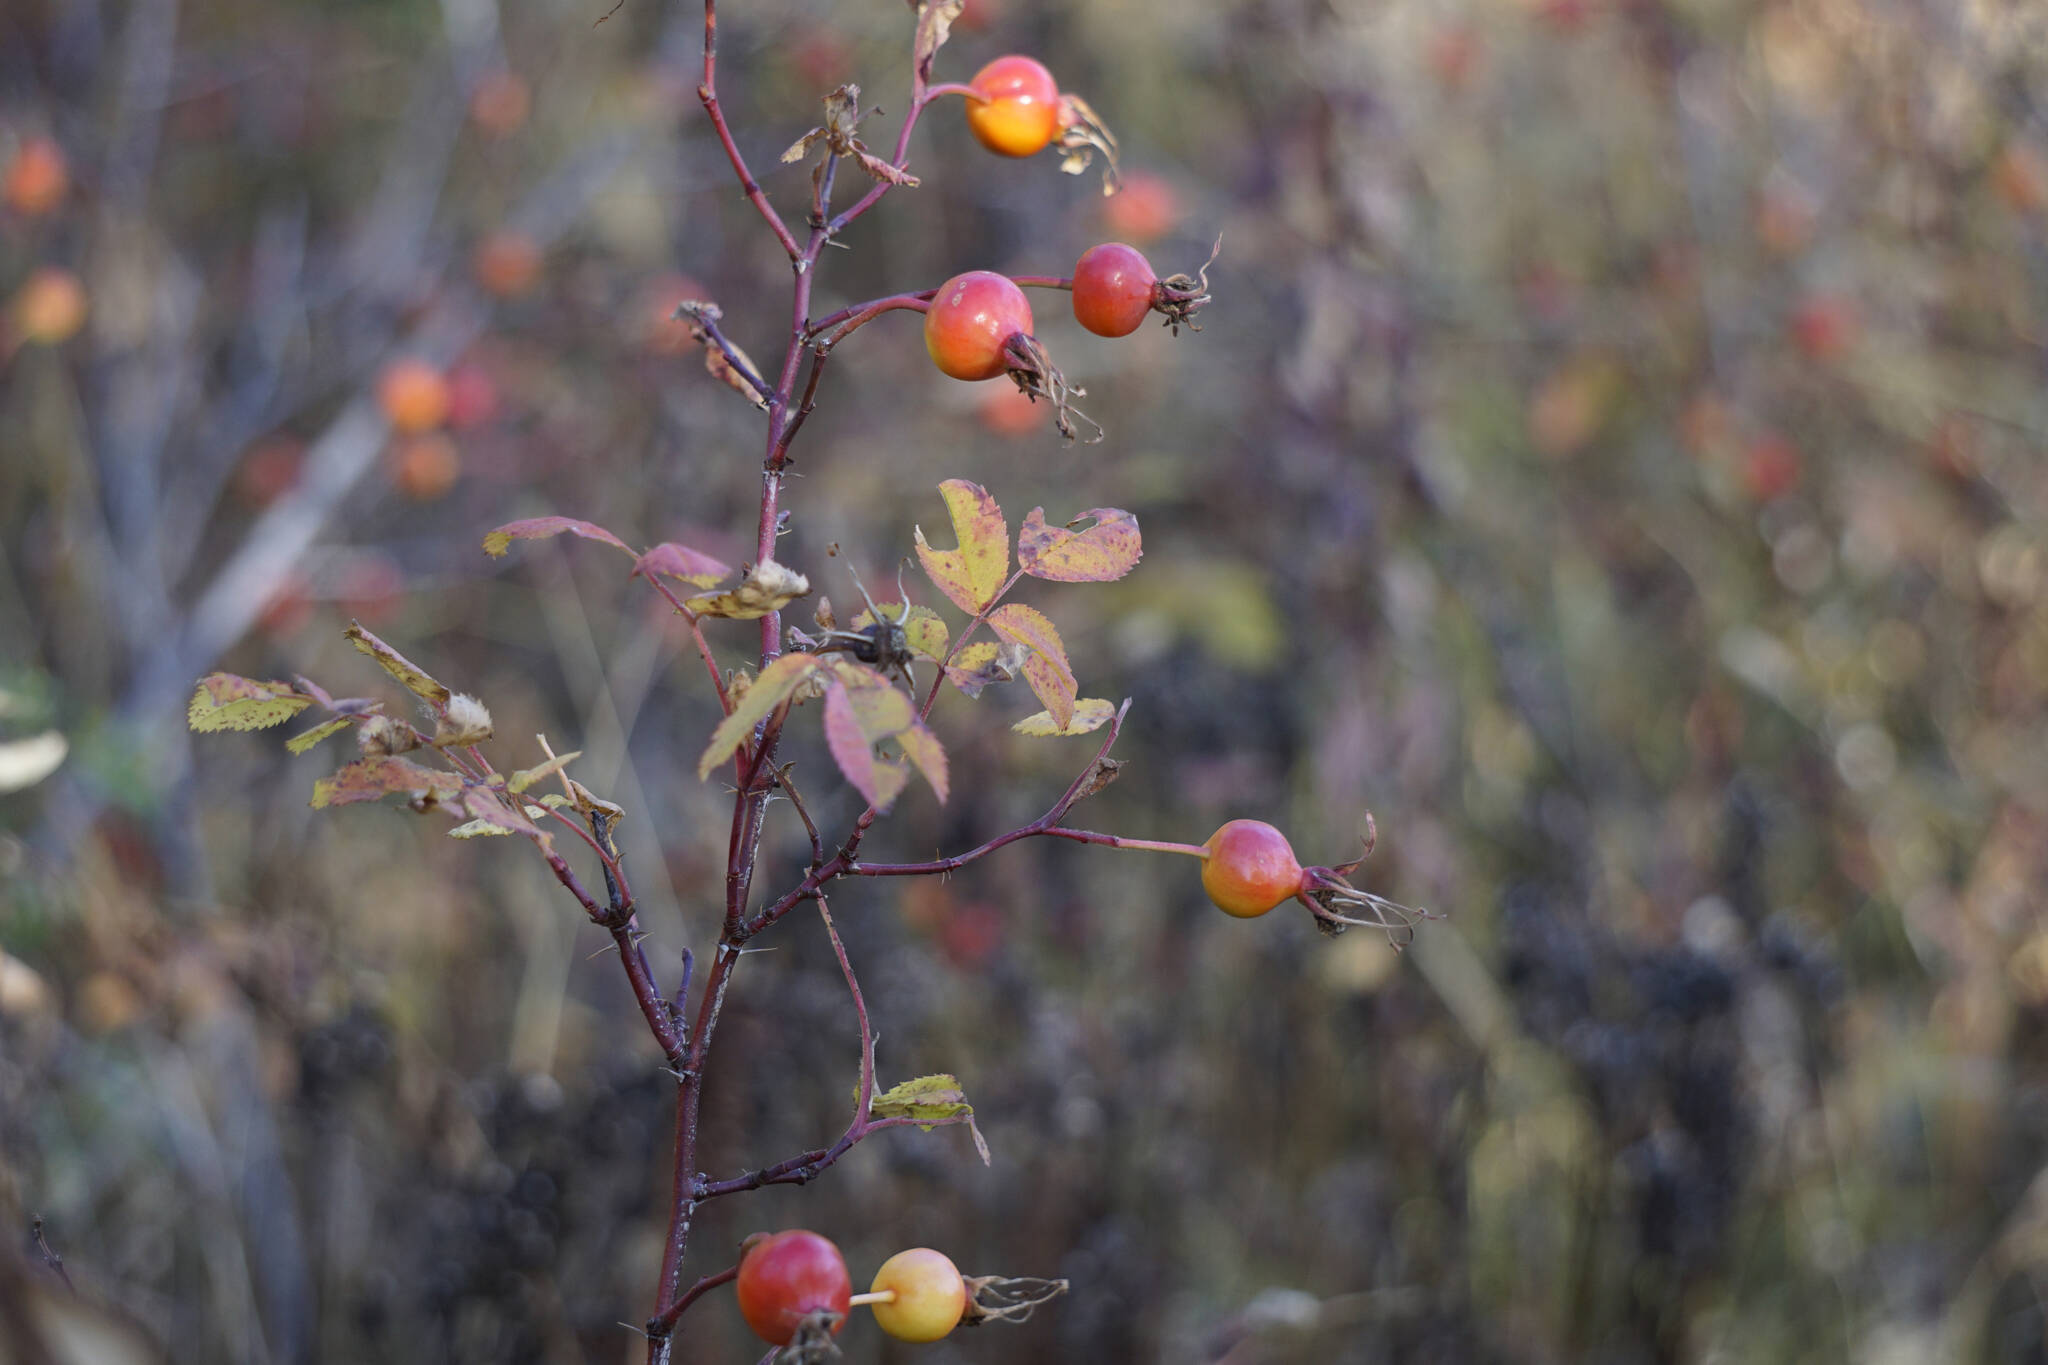 Rose hips are just coming to fruit as seen from a trail in the Cottonwood-Eastland Unit of Kachemak Bay State Park off East End Road on Sunday, Oct. 3, 2021, near Homer, Alaska. (Photo by Michael Armstrong)